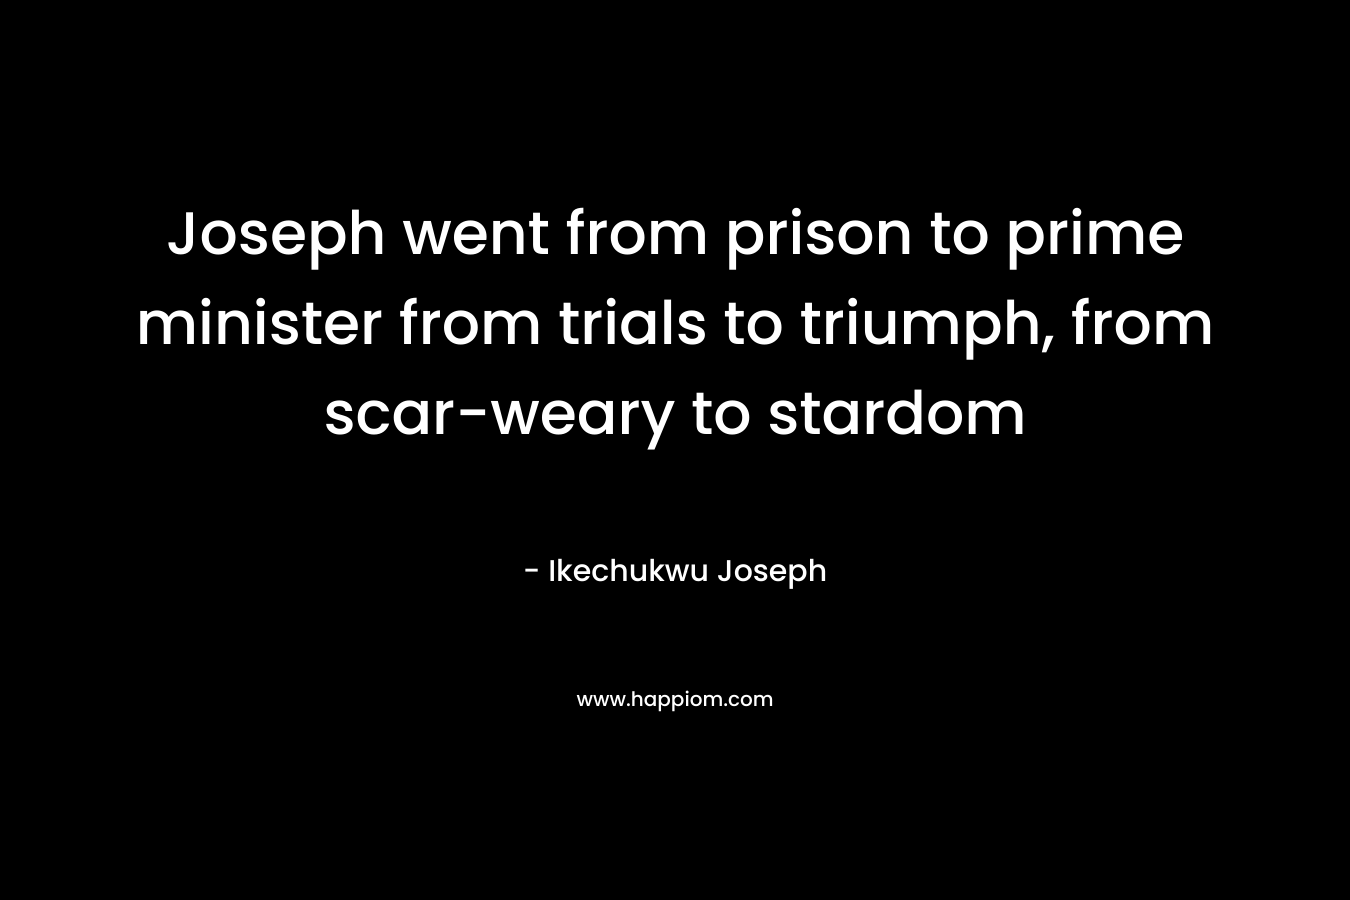 Joseph went from prison to prime minister from trials to triumph, from scar-weary to stardom